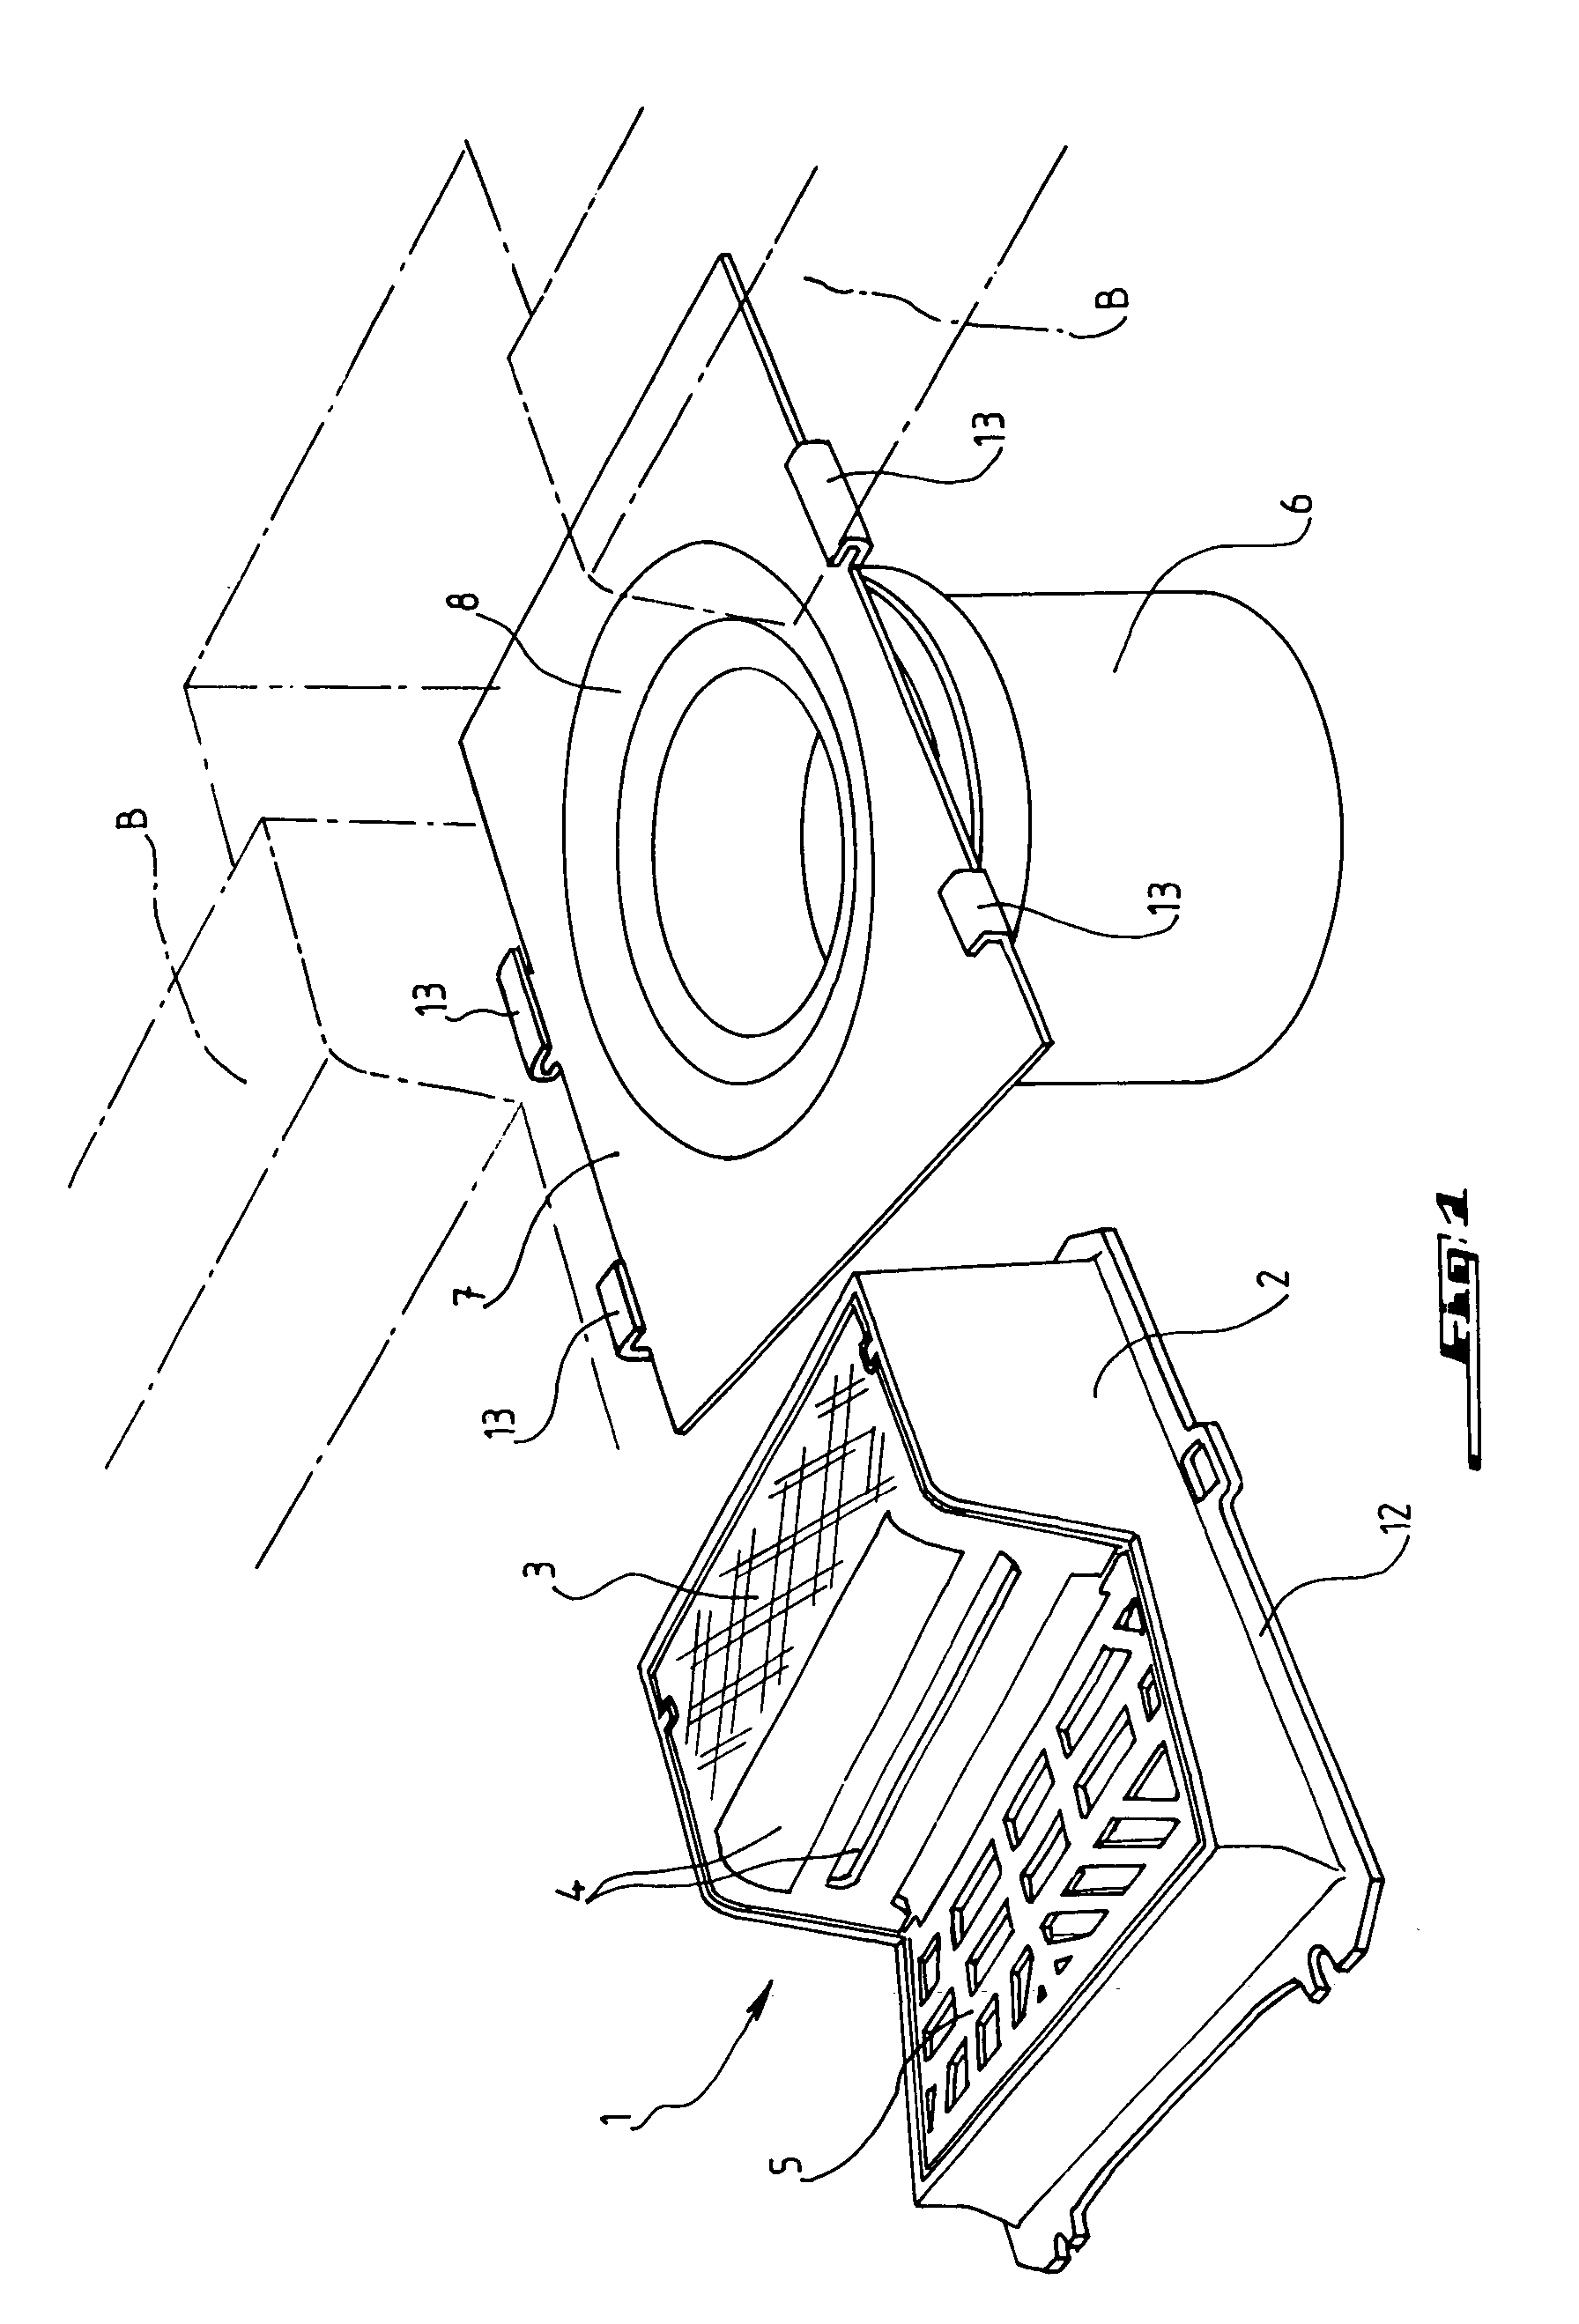 Device for connecting a piece of road equipment, such as drain inlet, to a vertical fixed runoff drainage pipe